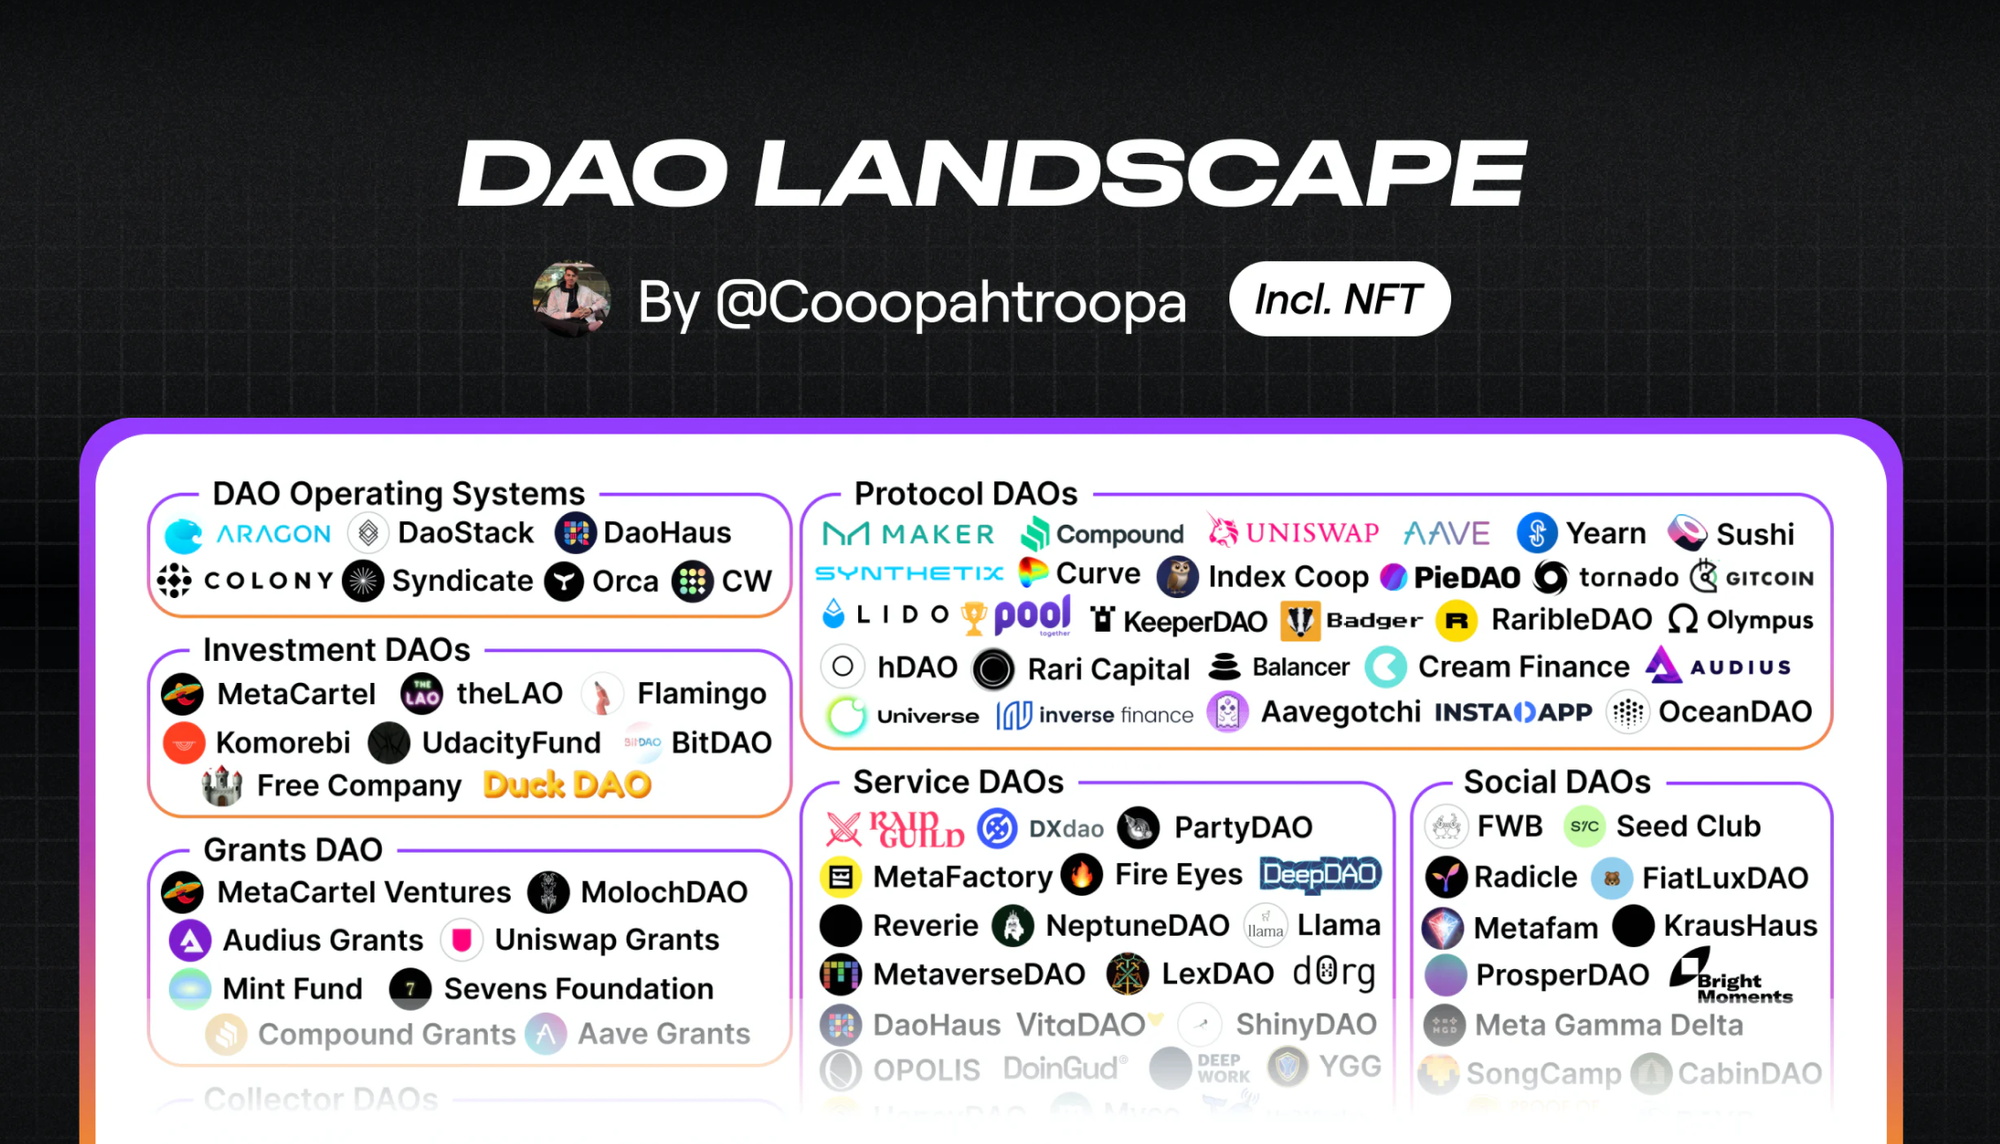 DAO Landscape (@Coopahtroopa